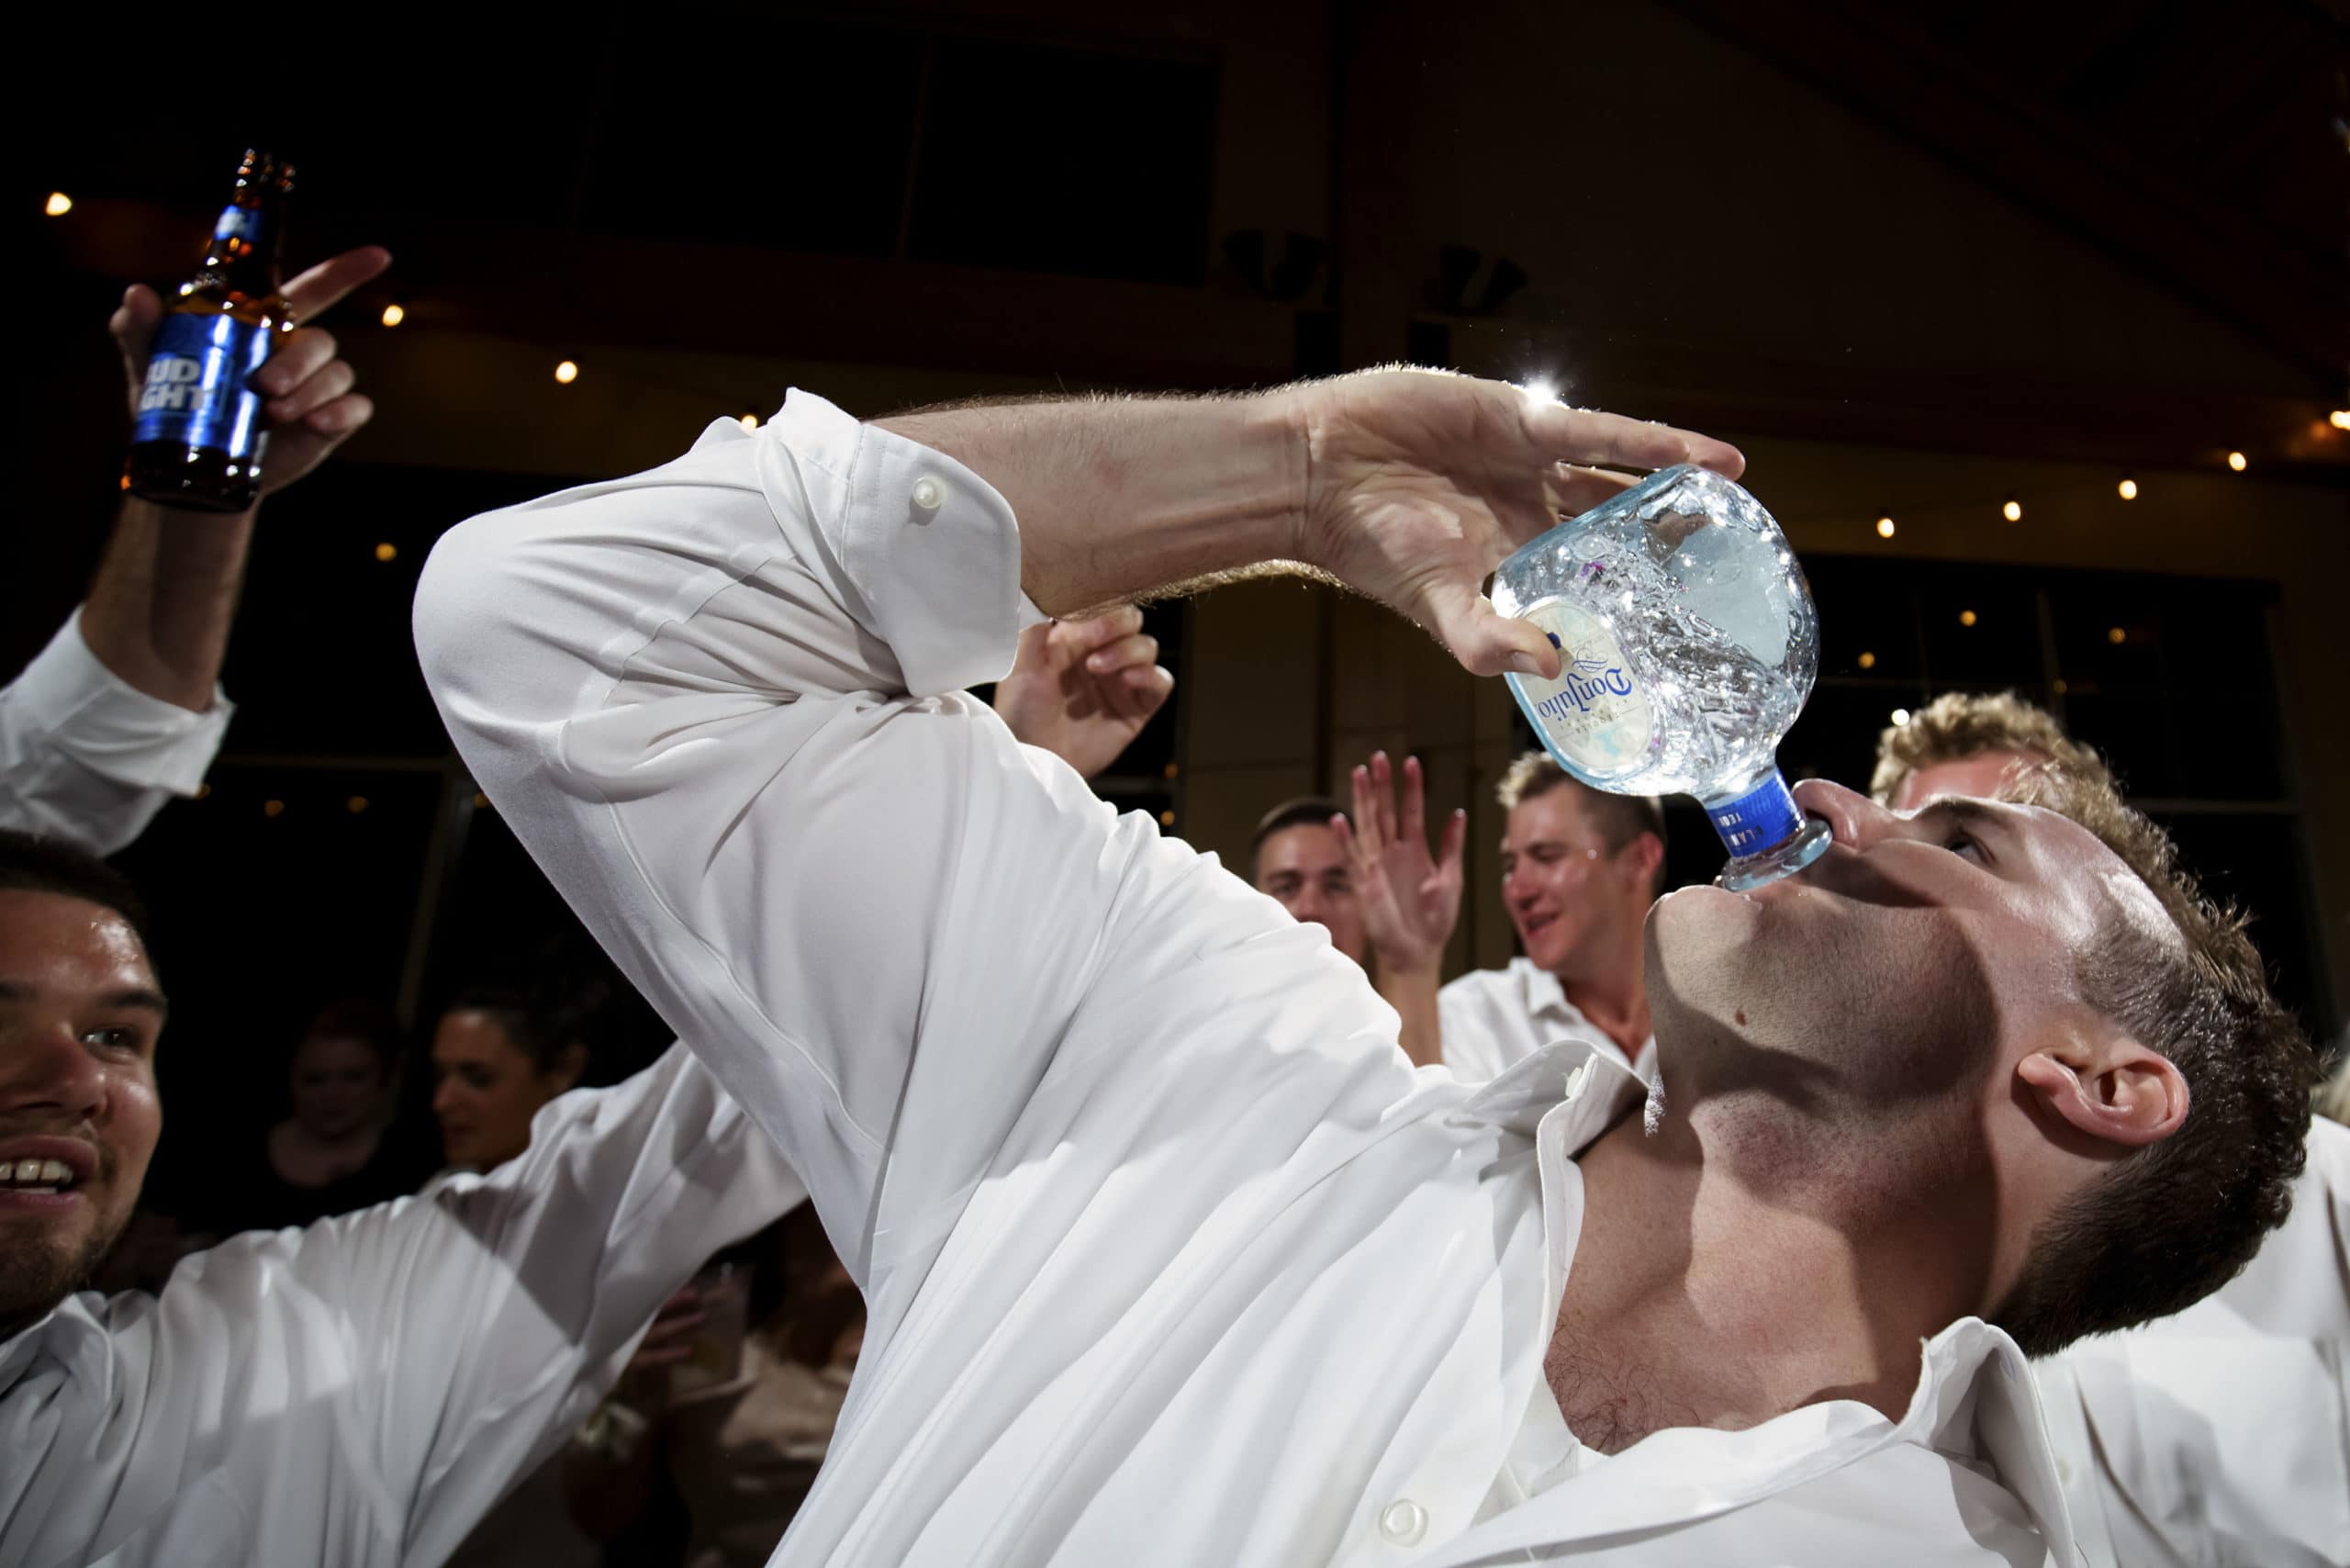 The groom drinks from a bottle of tequila during his wedding reception in the Grand Hall at Copper Station